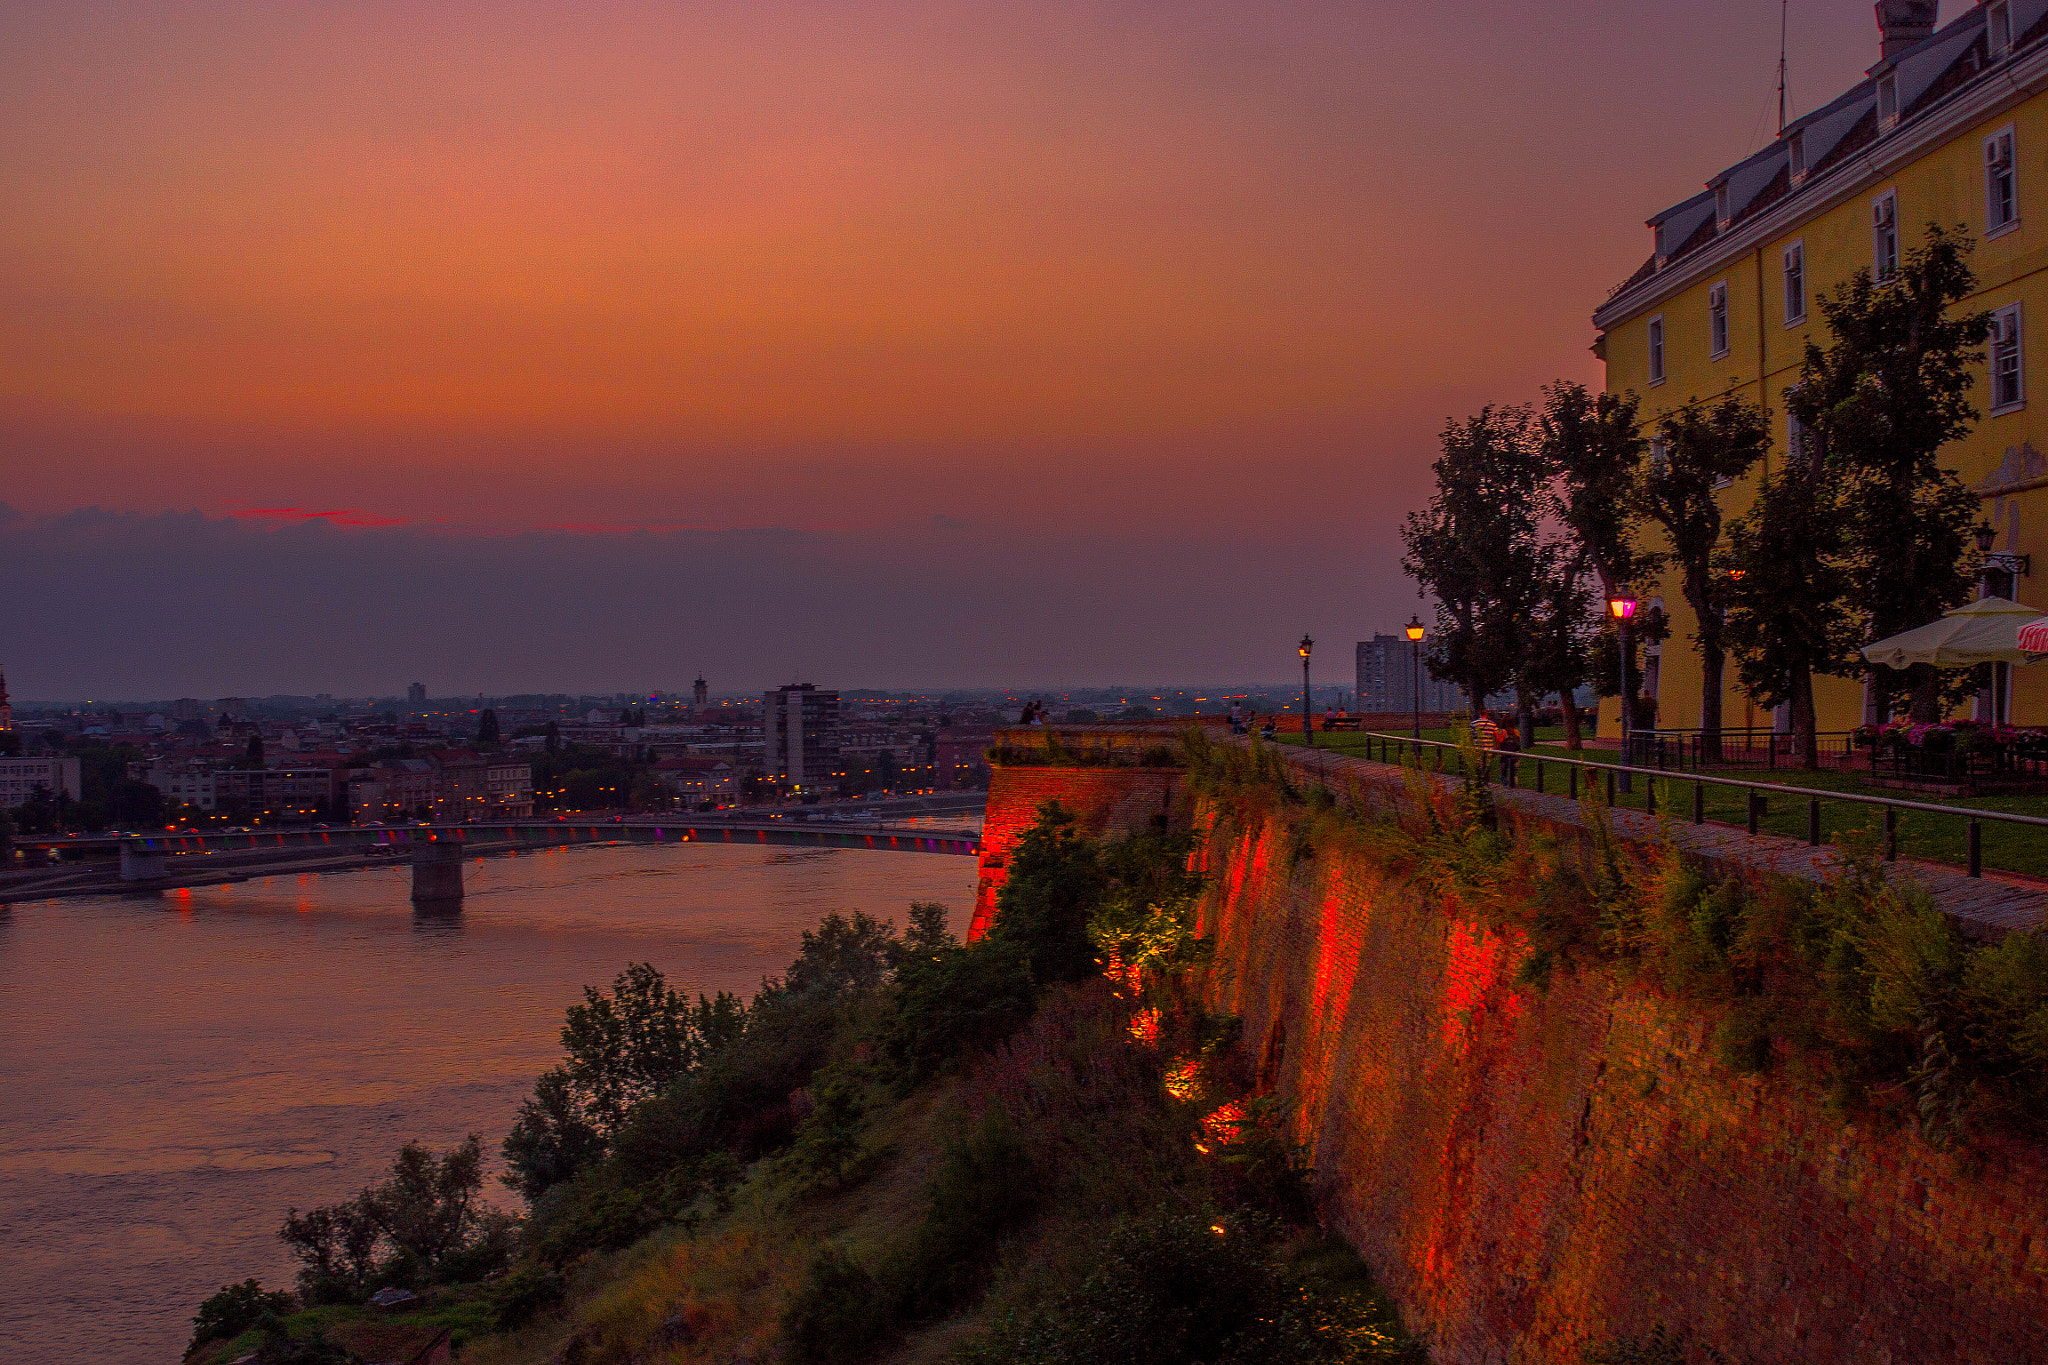 AF Zoom-Nikkor 28-200mm f/3.5-5.6D IF sample photo. Evening at the petrovaradin fortress﻿ photography